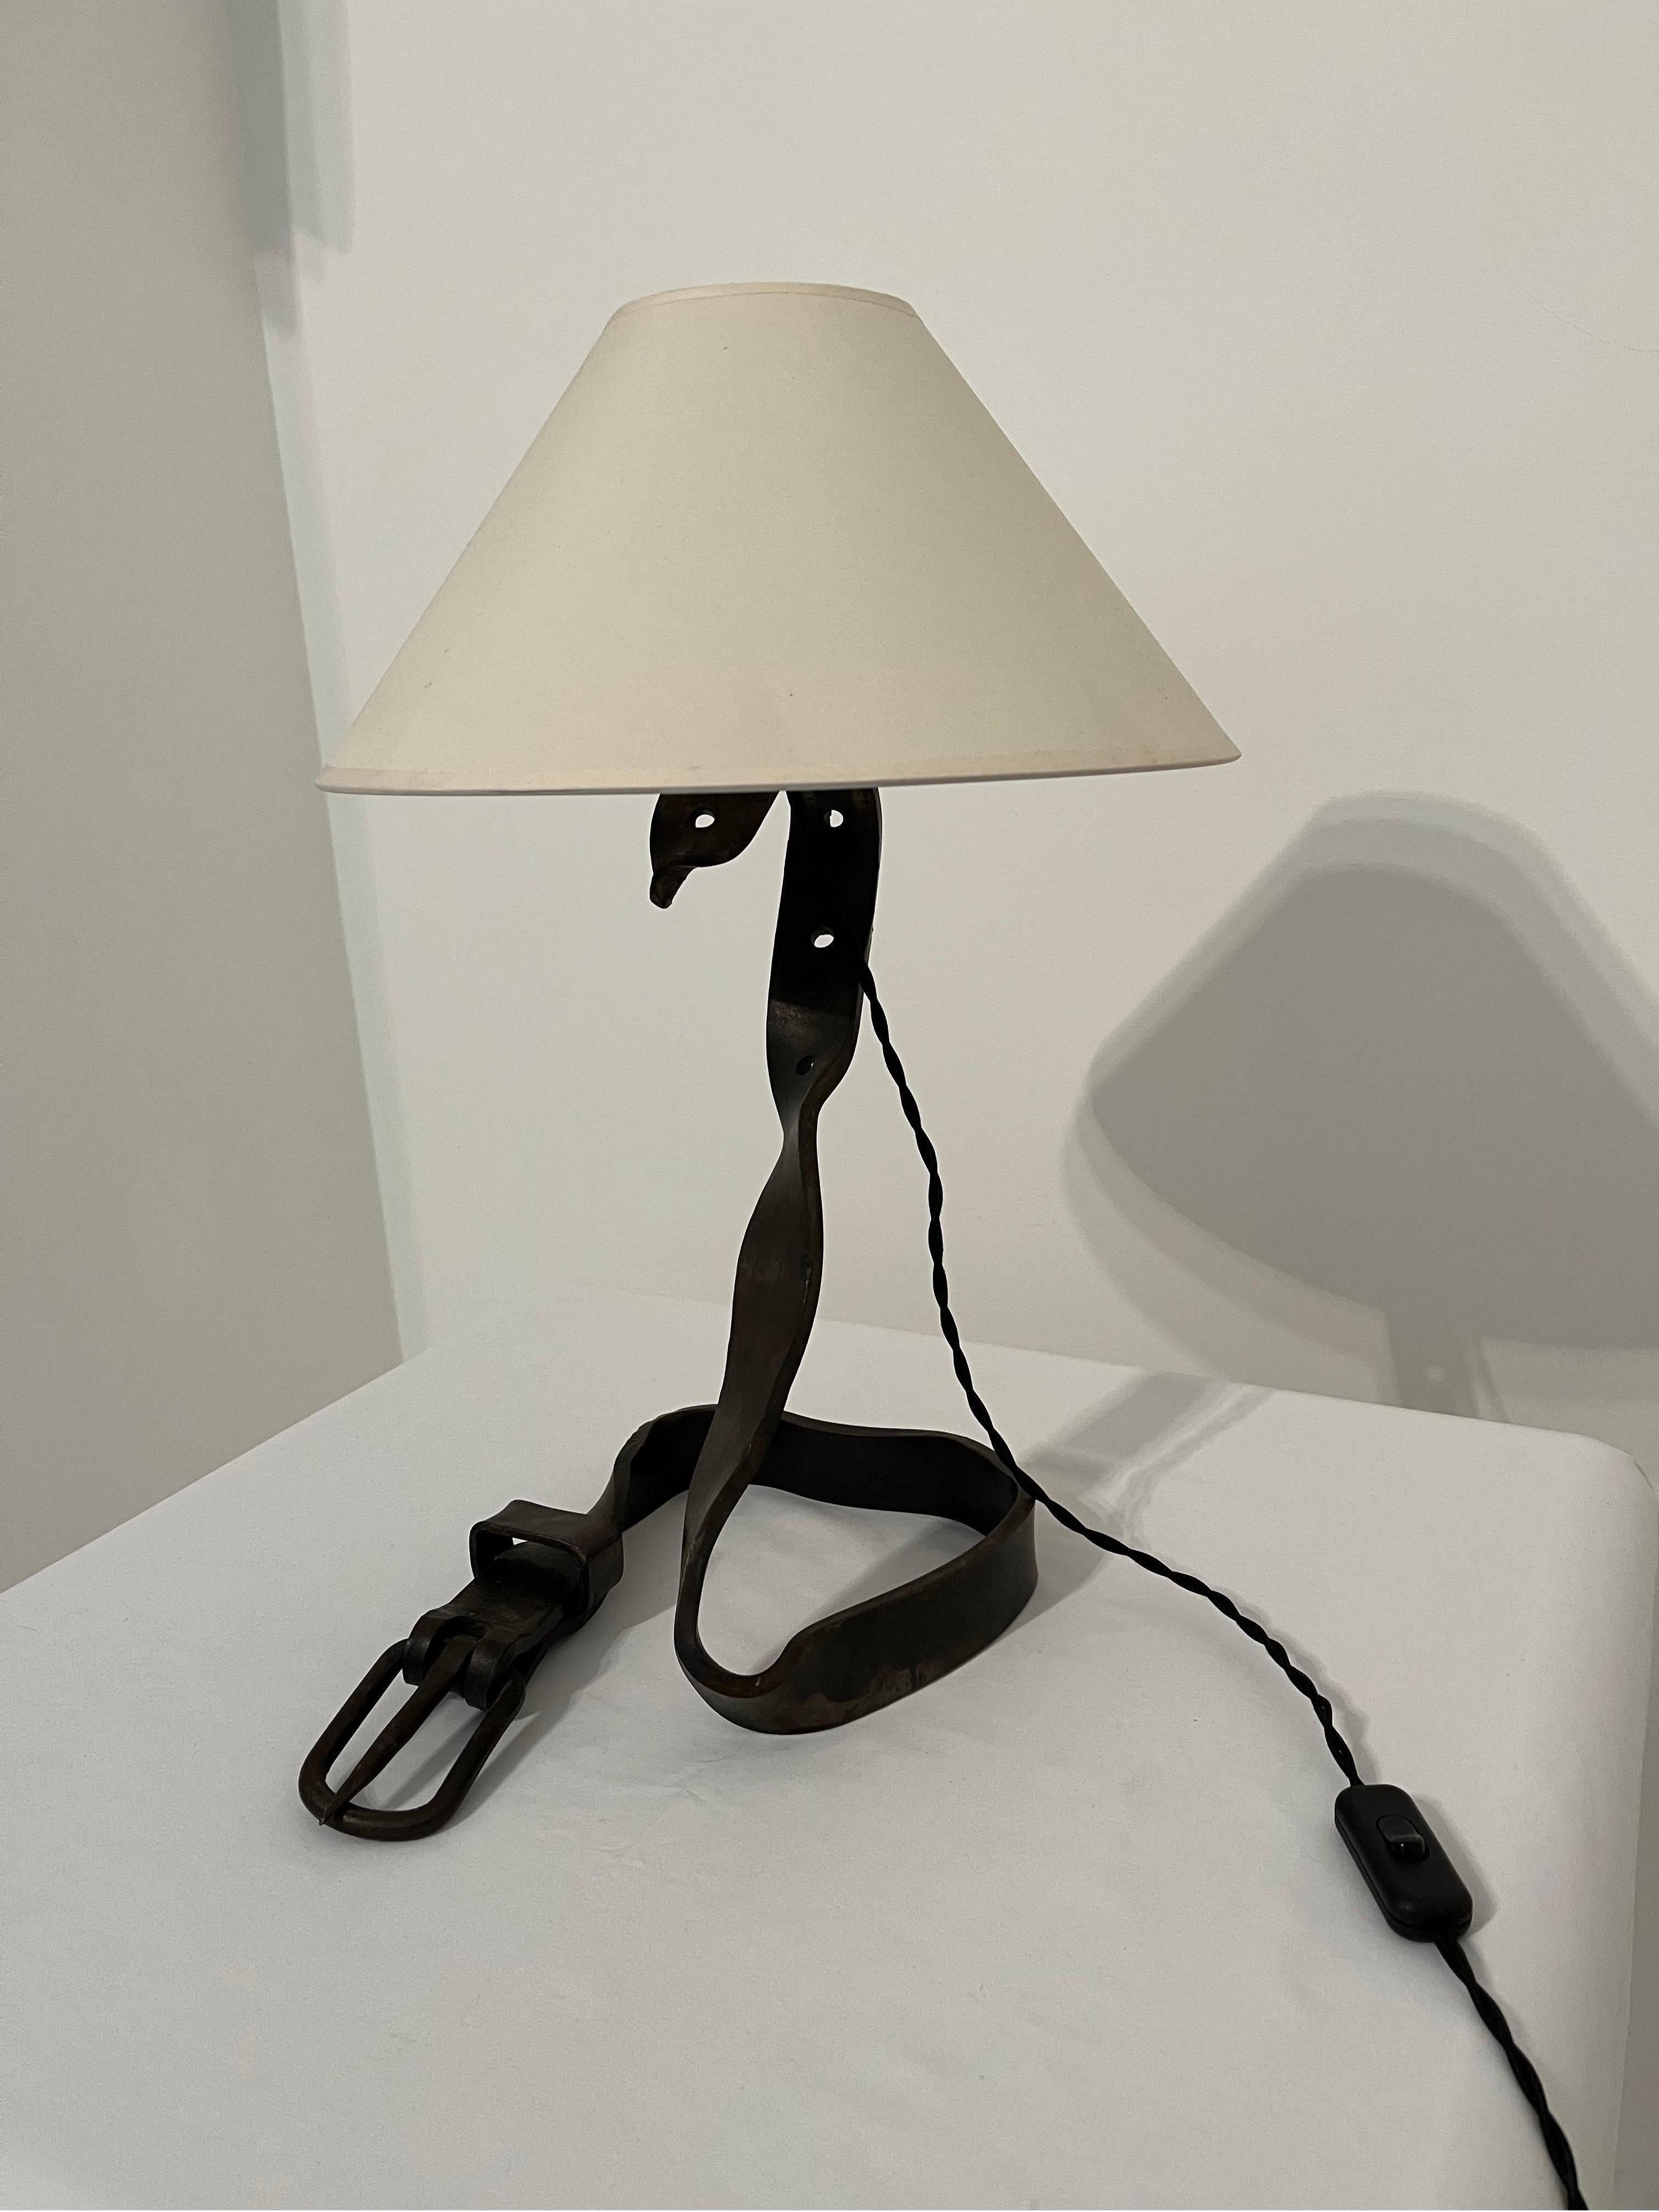 Wrought Iron Belt Lamp France c1950s Sculptural Artisan  In Excellent Condition For Sale In Gravesend, GB